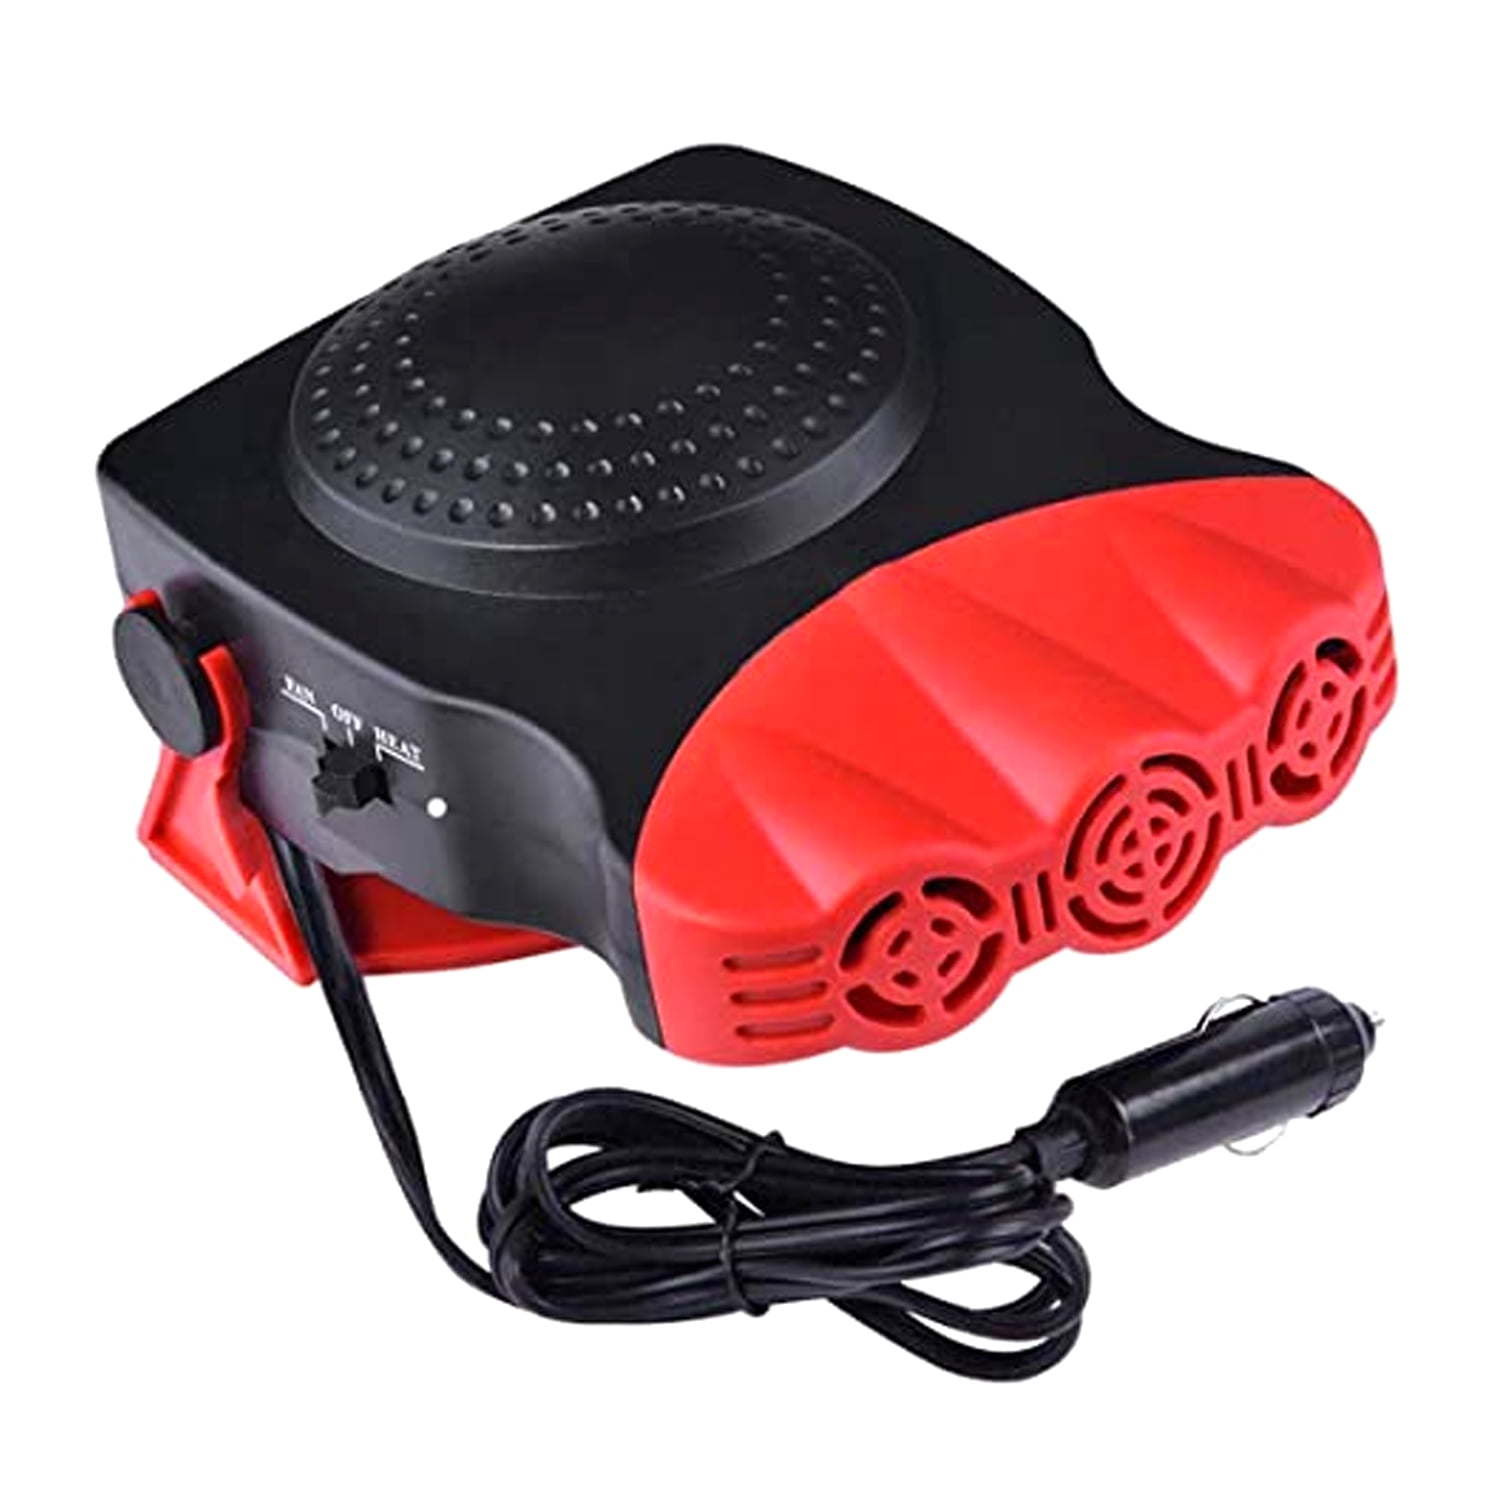 Jinyi Car Heater 2 In 1 Portable 12 V 150 W High Power Rapid Heating And  Cooling Fan Defrosting Defogger For Car Windshield (red) 1 Pack